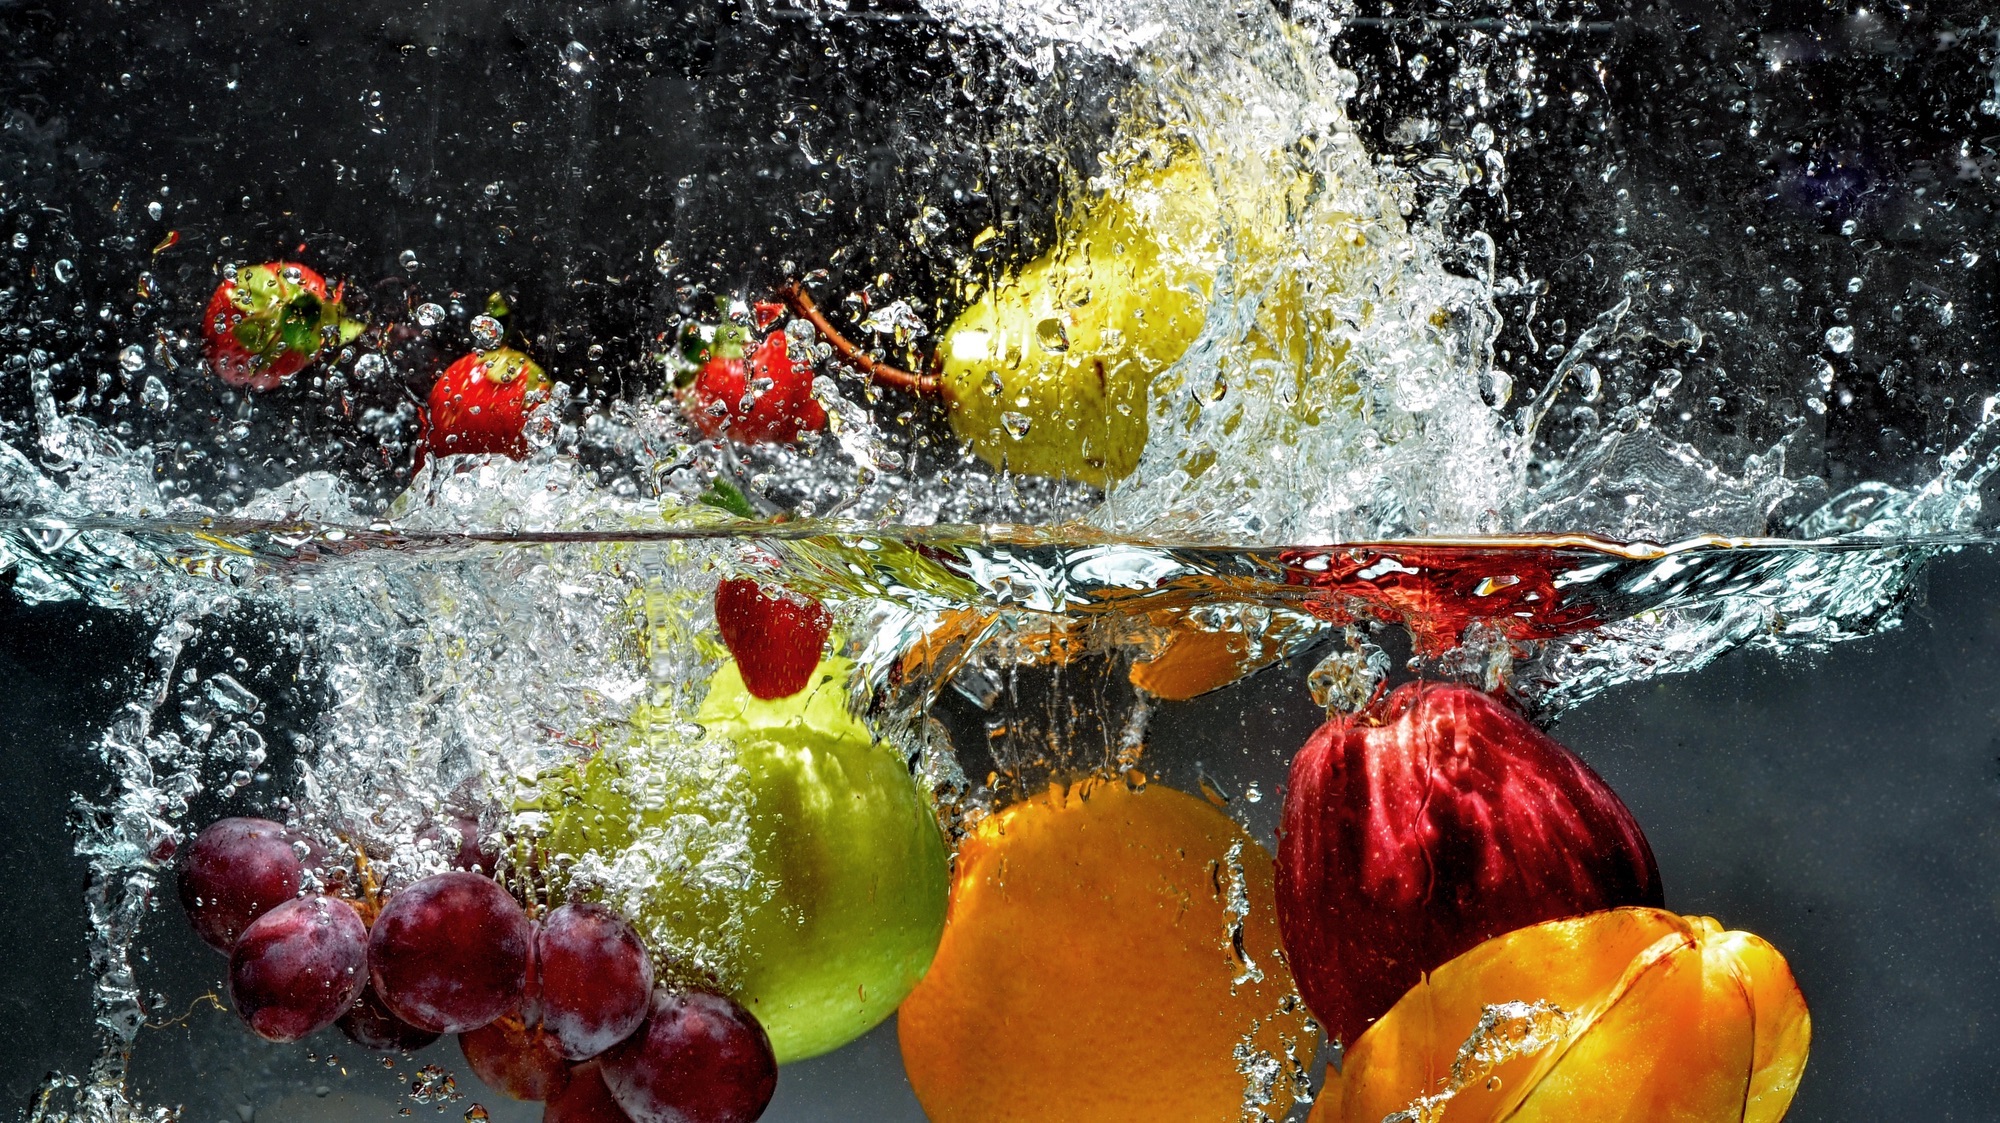 How to properly wash fruits and vegetables